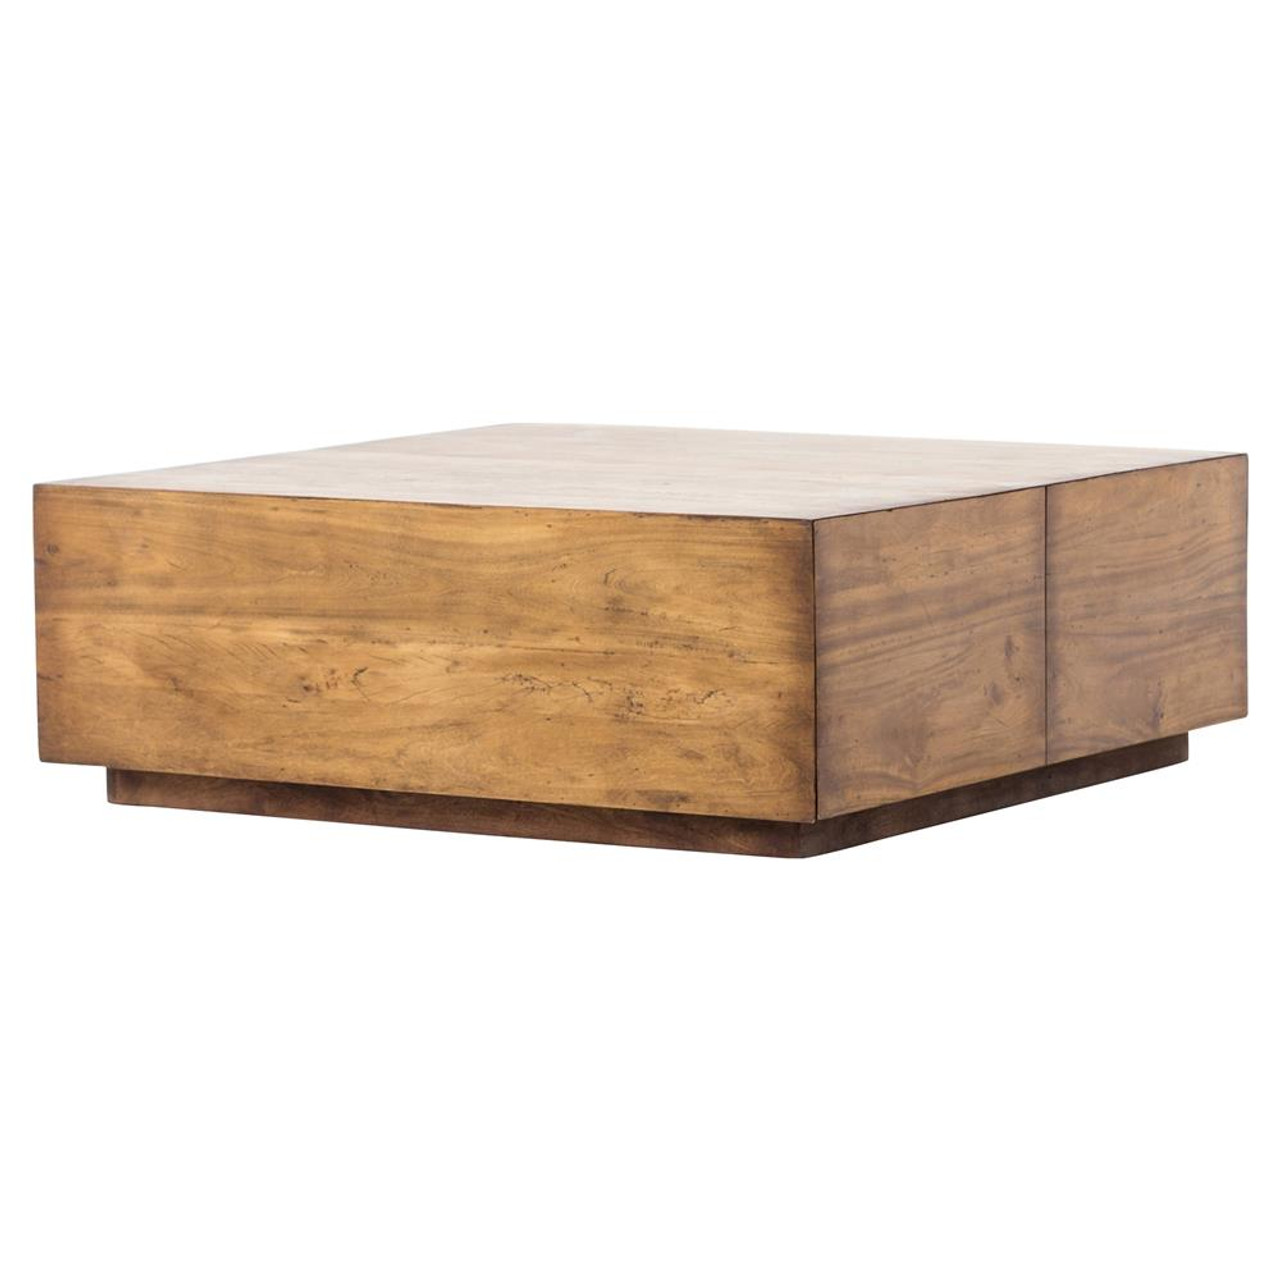 Square Reclaimed Wood Coffee Table - Four Hands Harmon Reclaimed Fruitwood 42 Wide Square Coffee Table Fsihrm047 / Love the colors and distressed finish.